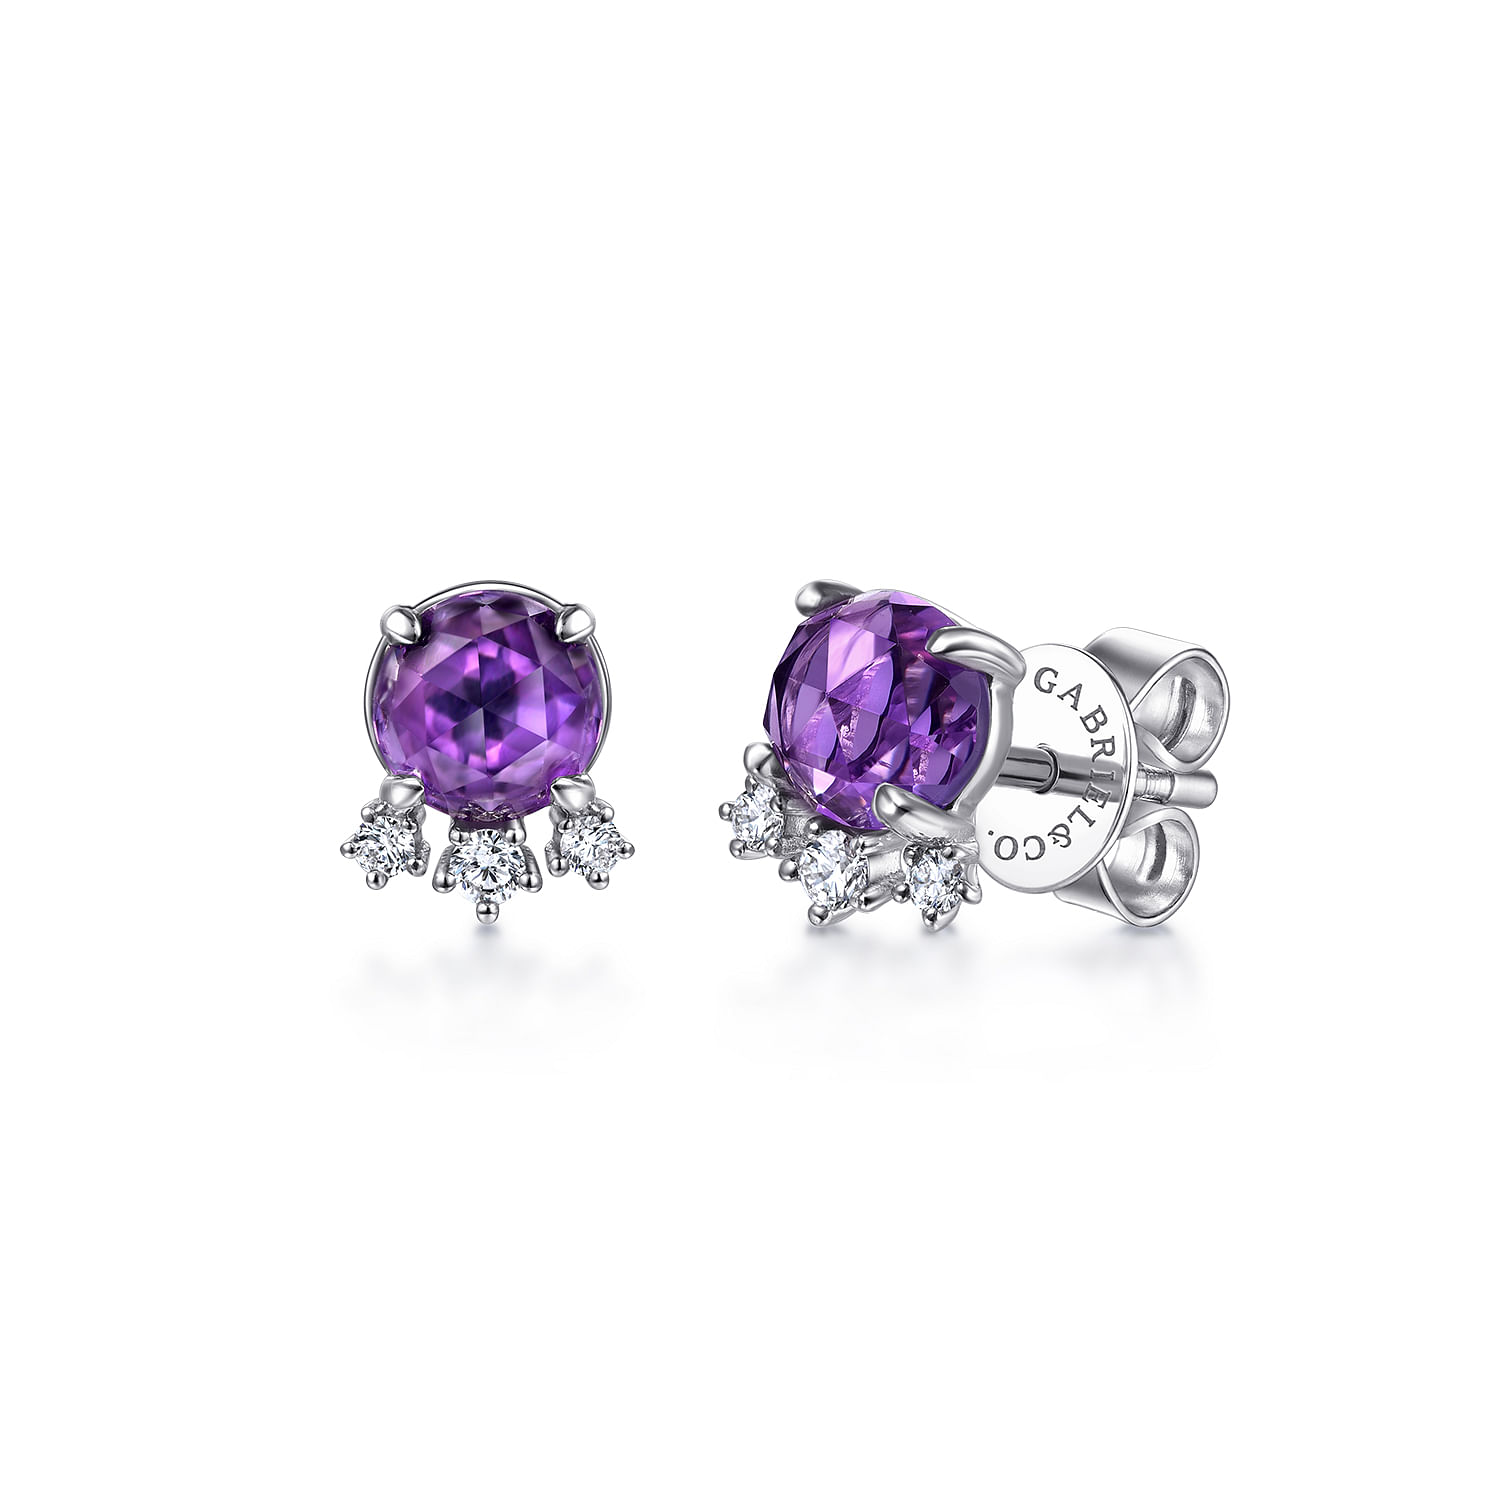 14k White Gold Round Amethyst And Diamond Earrings 